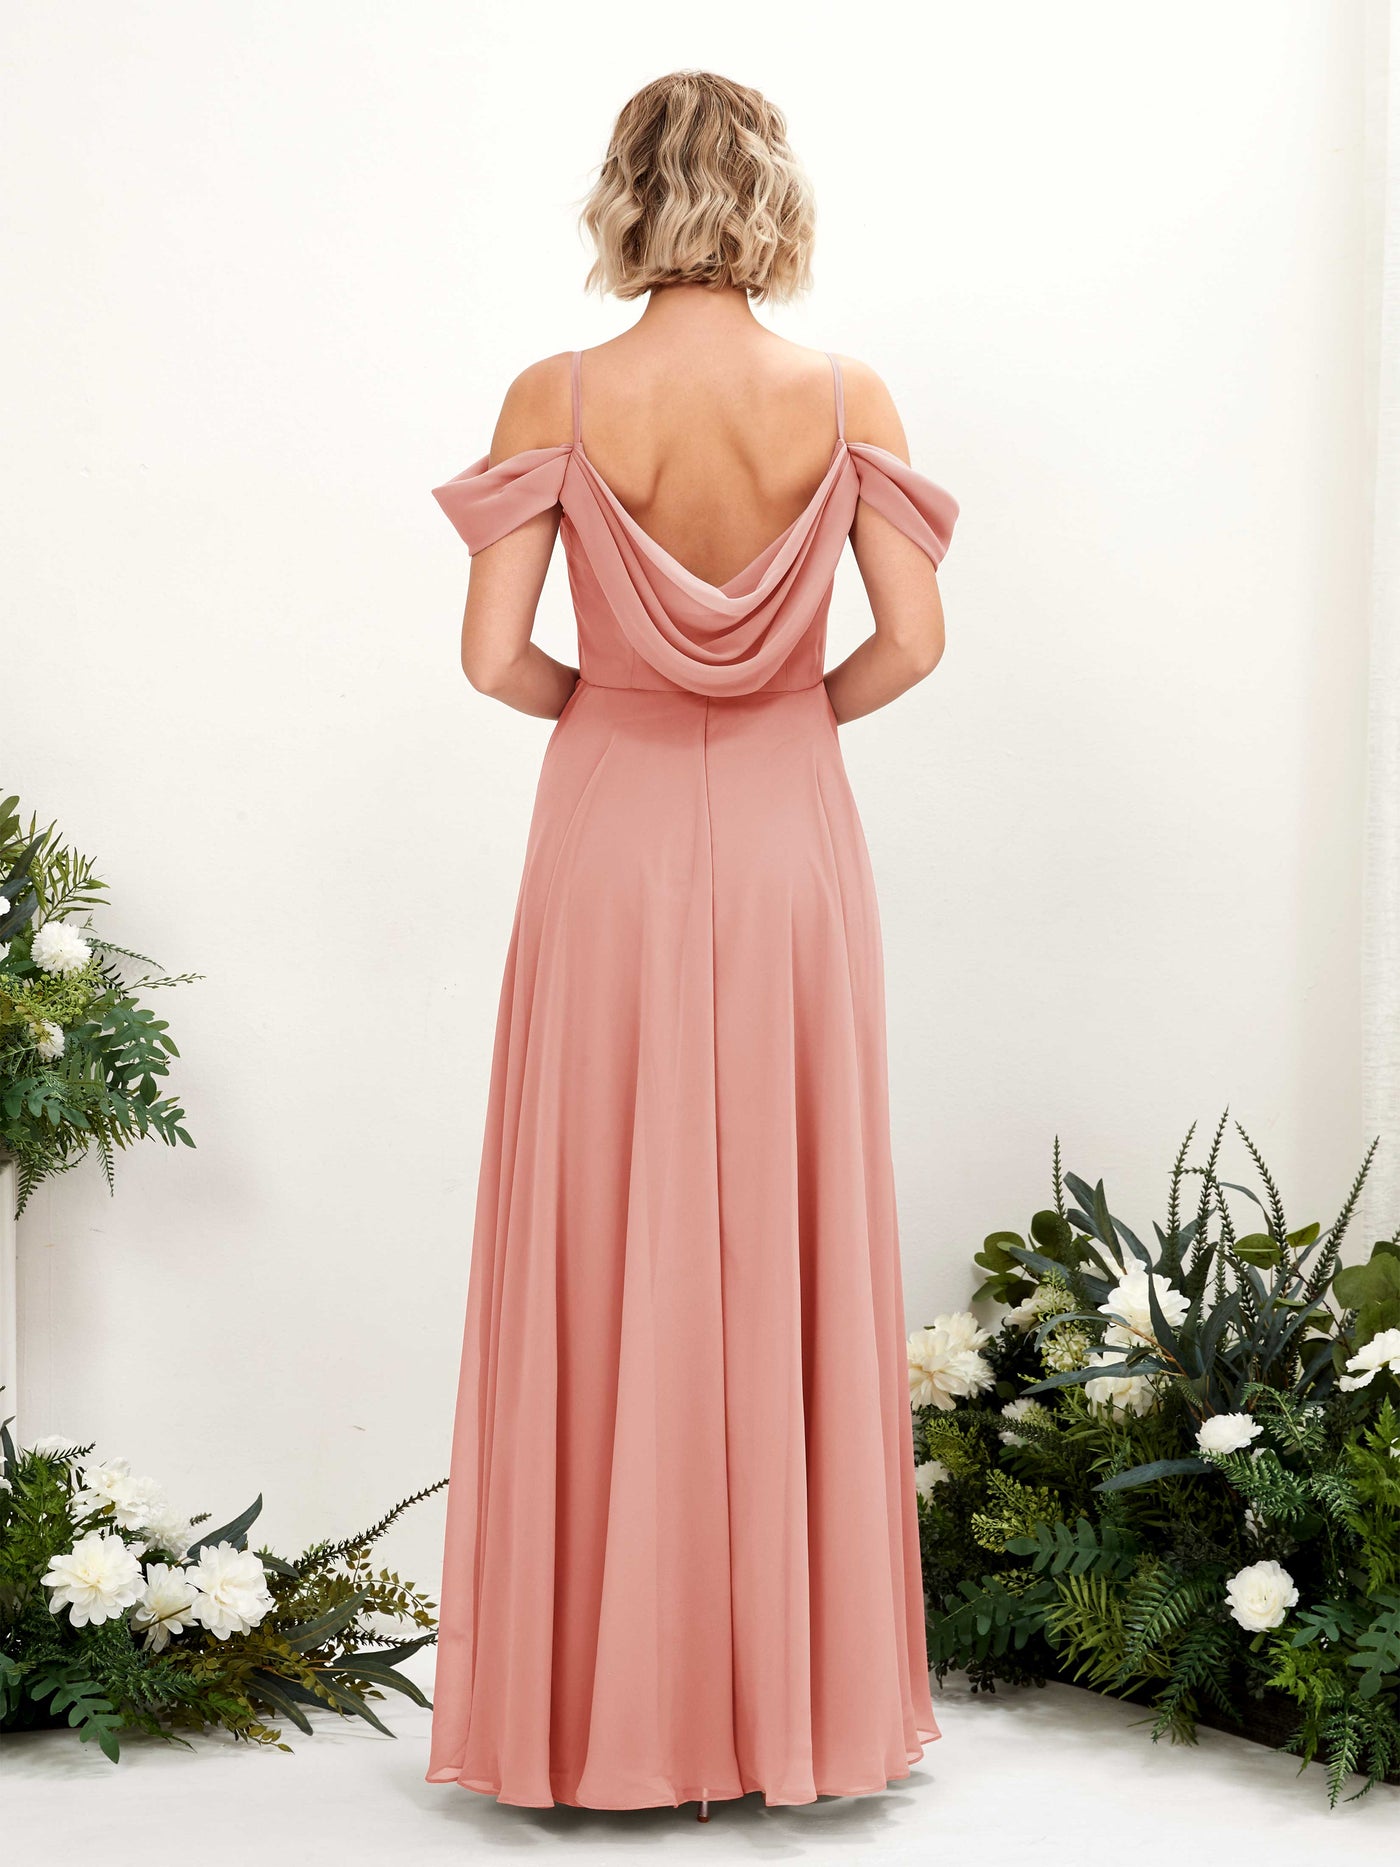 Champagne Rose Bridesmaid Dresses Bridesmaid Dress A-line Chiffon Off Shoulder Full Length Sleeveless Wedding Party Dress (81224906)#color_champagne-rose